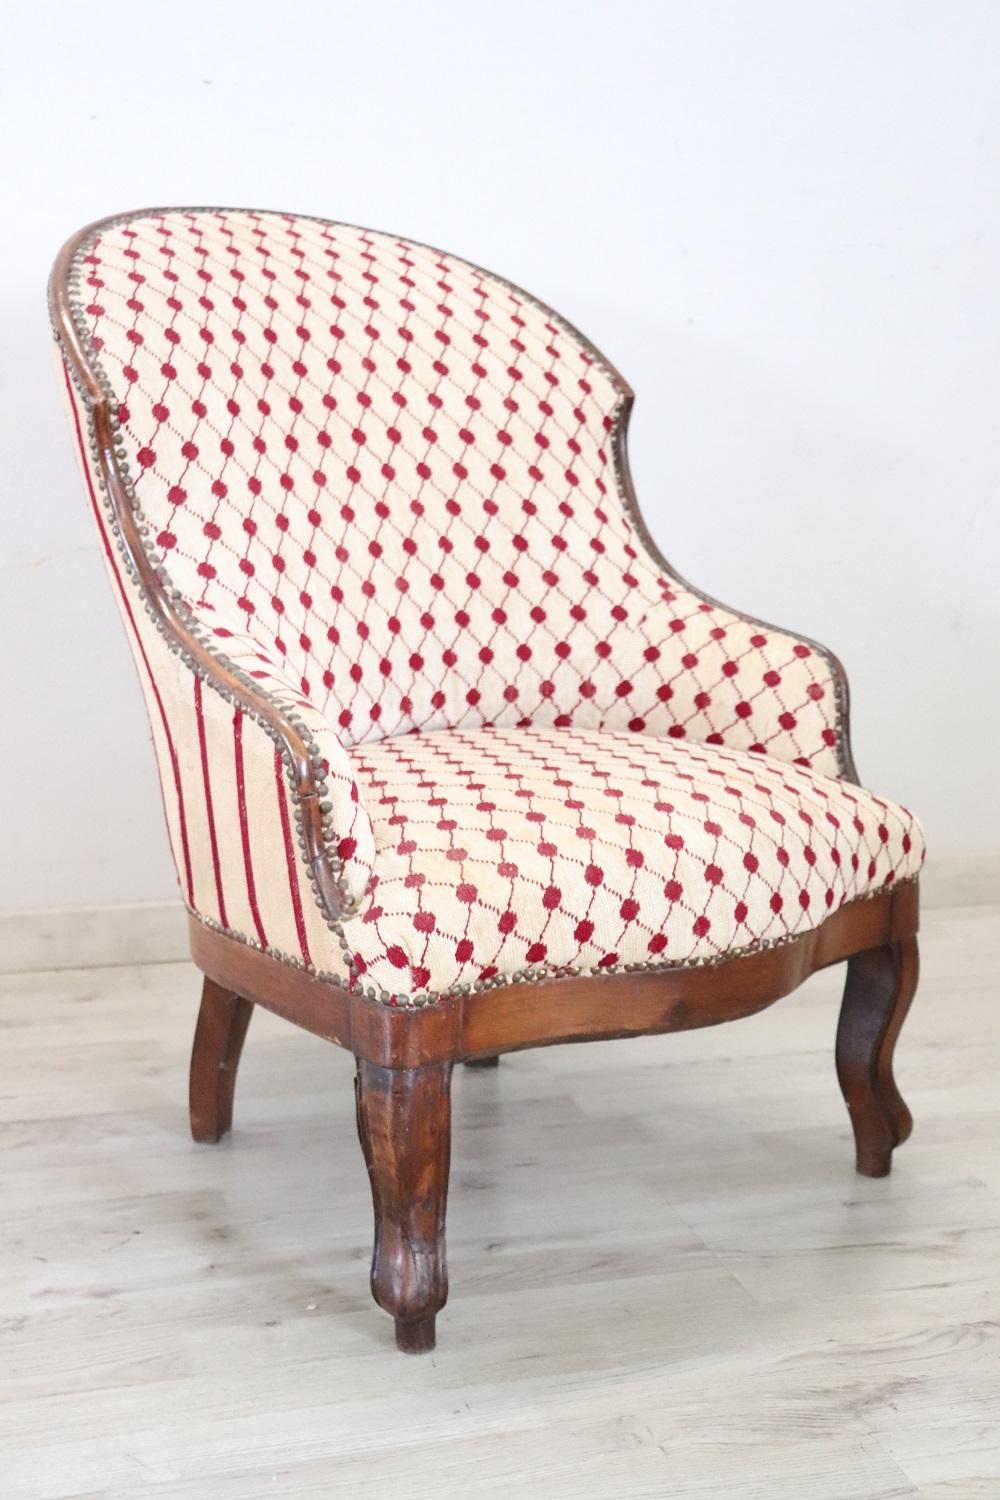 Delicious small antique Italian armchair from the mid-19th century. Made of solid walnut wood. Small size very comfortable and enveloping with padded backrest. These small armchairs were used to decorate bedrooms. Good general condition, signs of